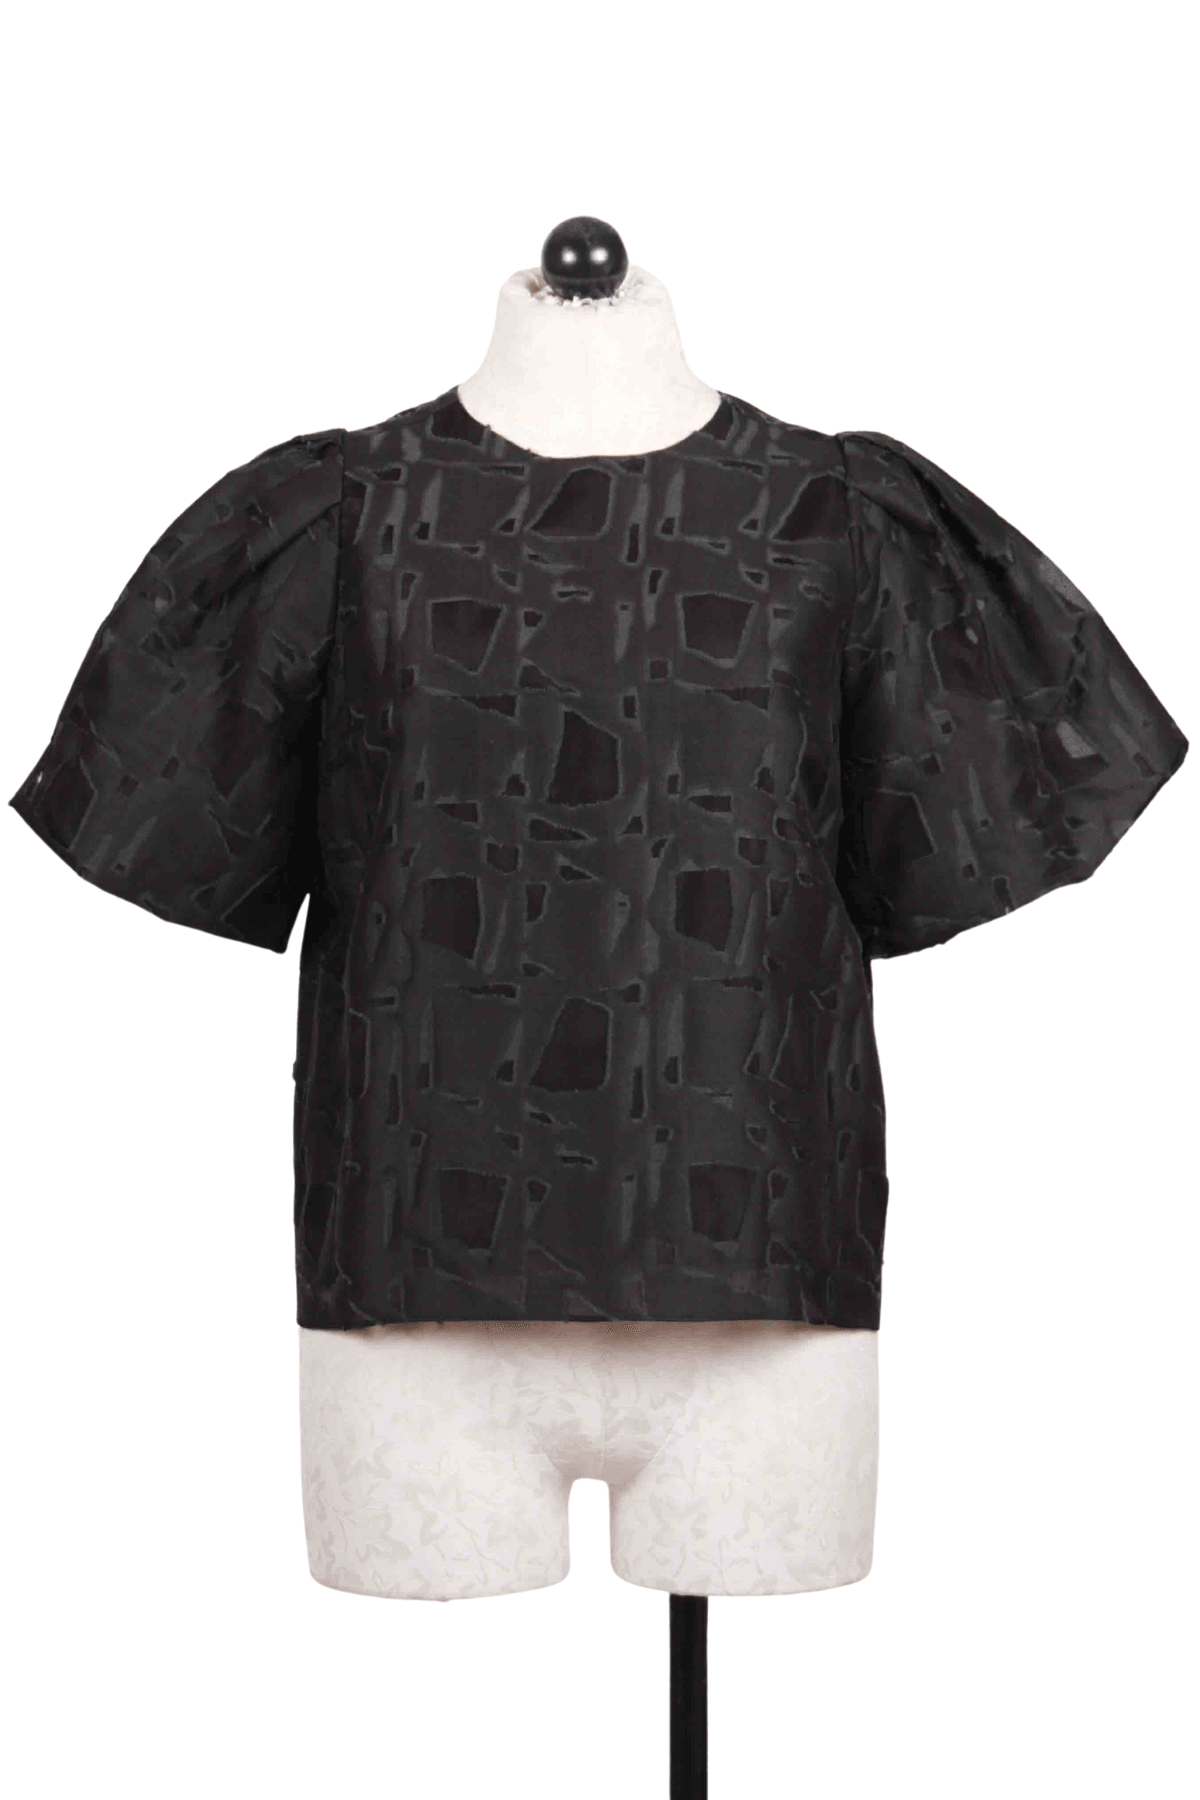 Black Jessa Short Bag Sleeve Top by Marie Oliver in a textured jacquard fabric